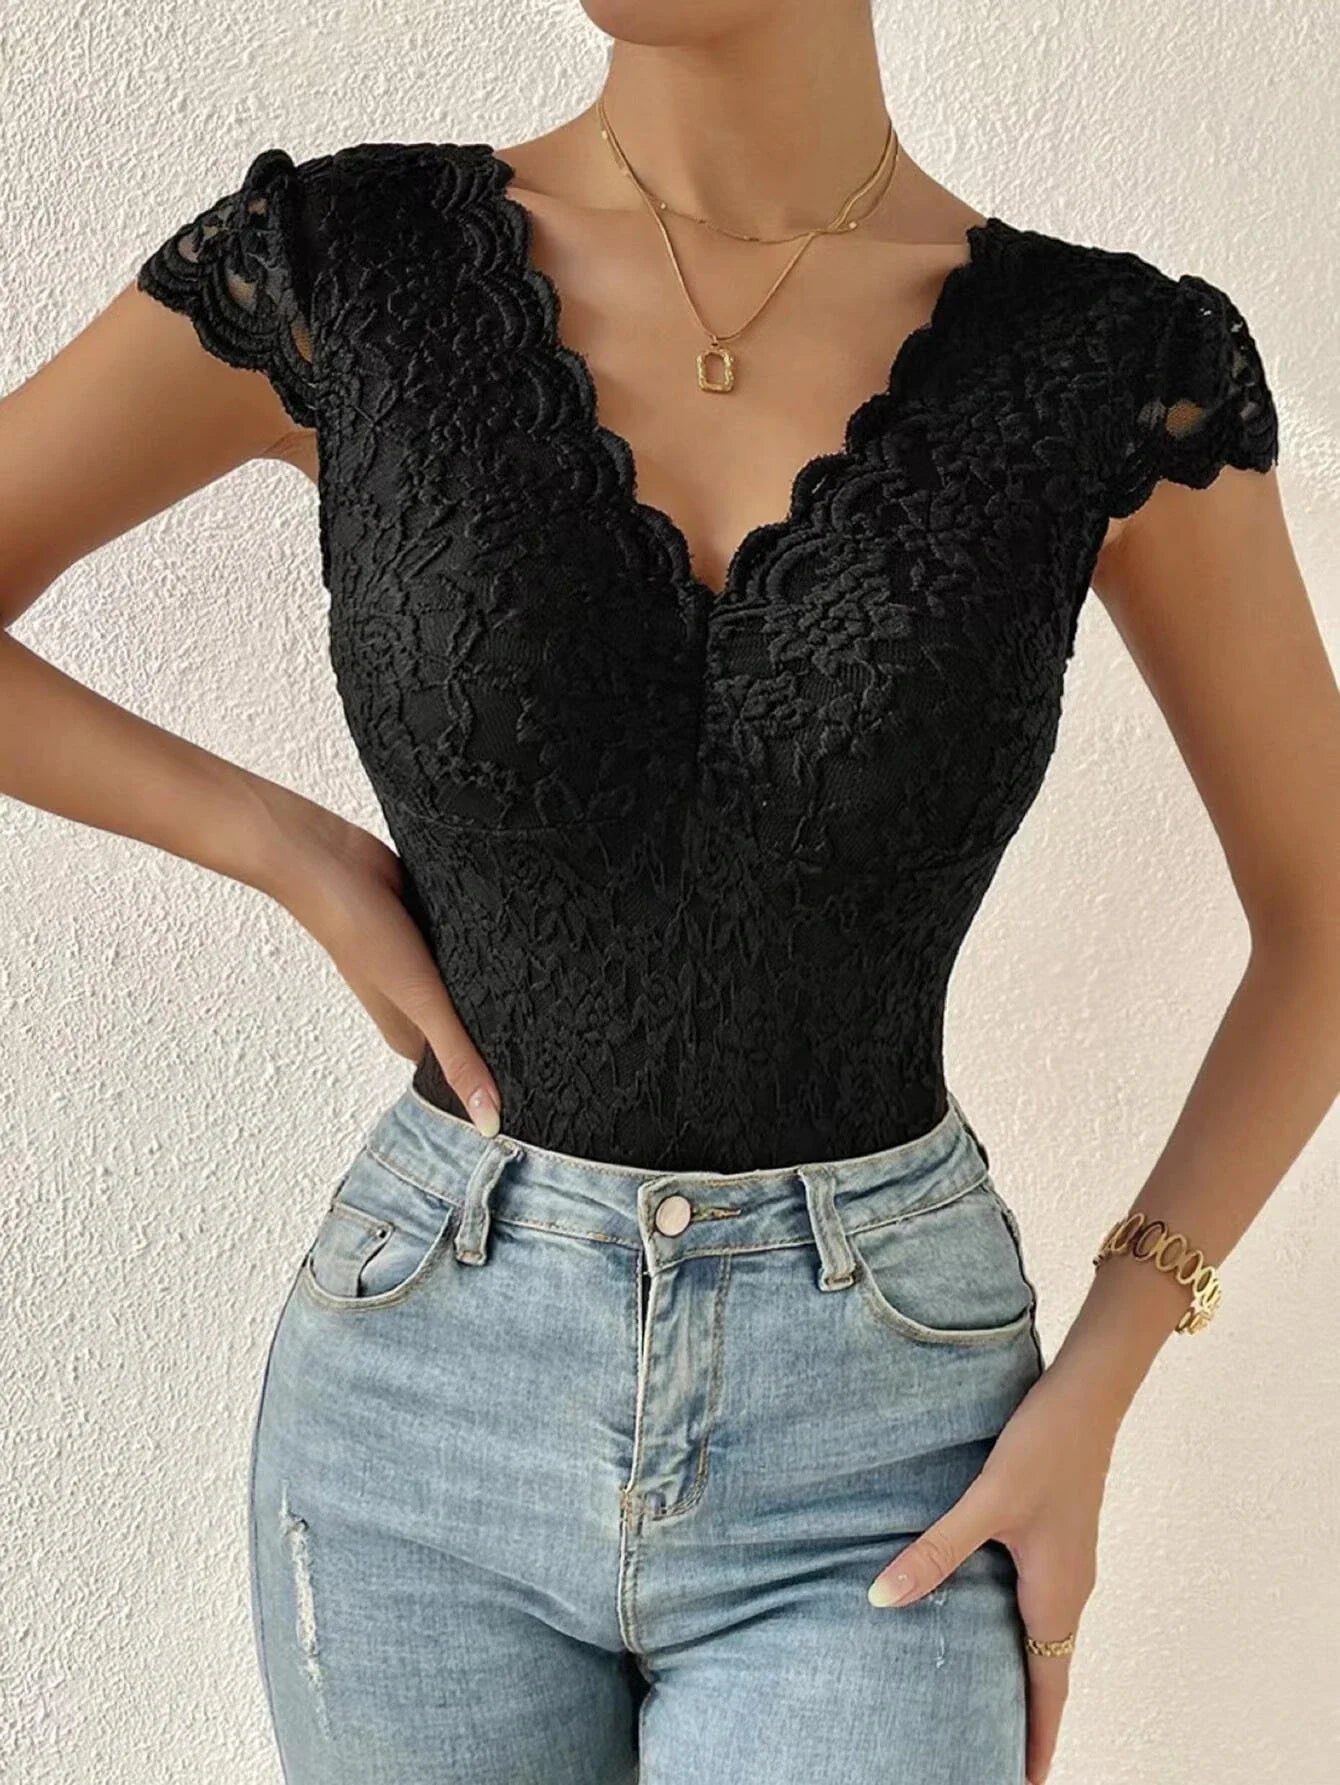 Sexy Sweet Floral V Neck Black Sheer Lace Bodysuit With Sleeves